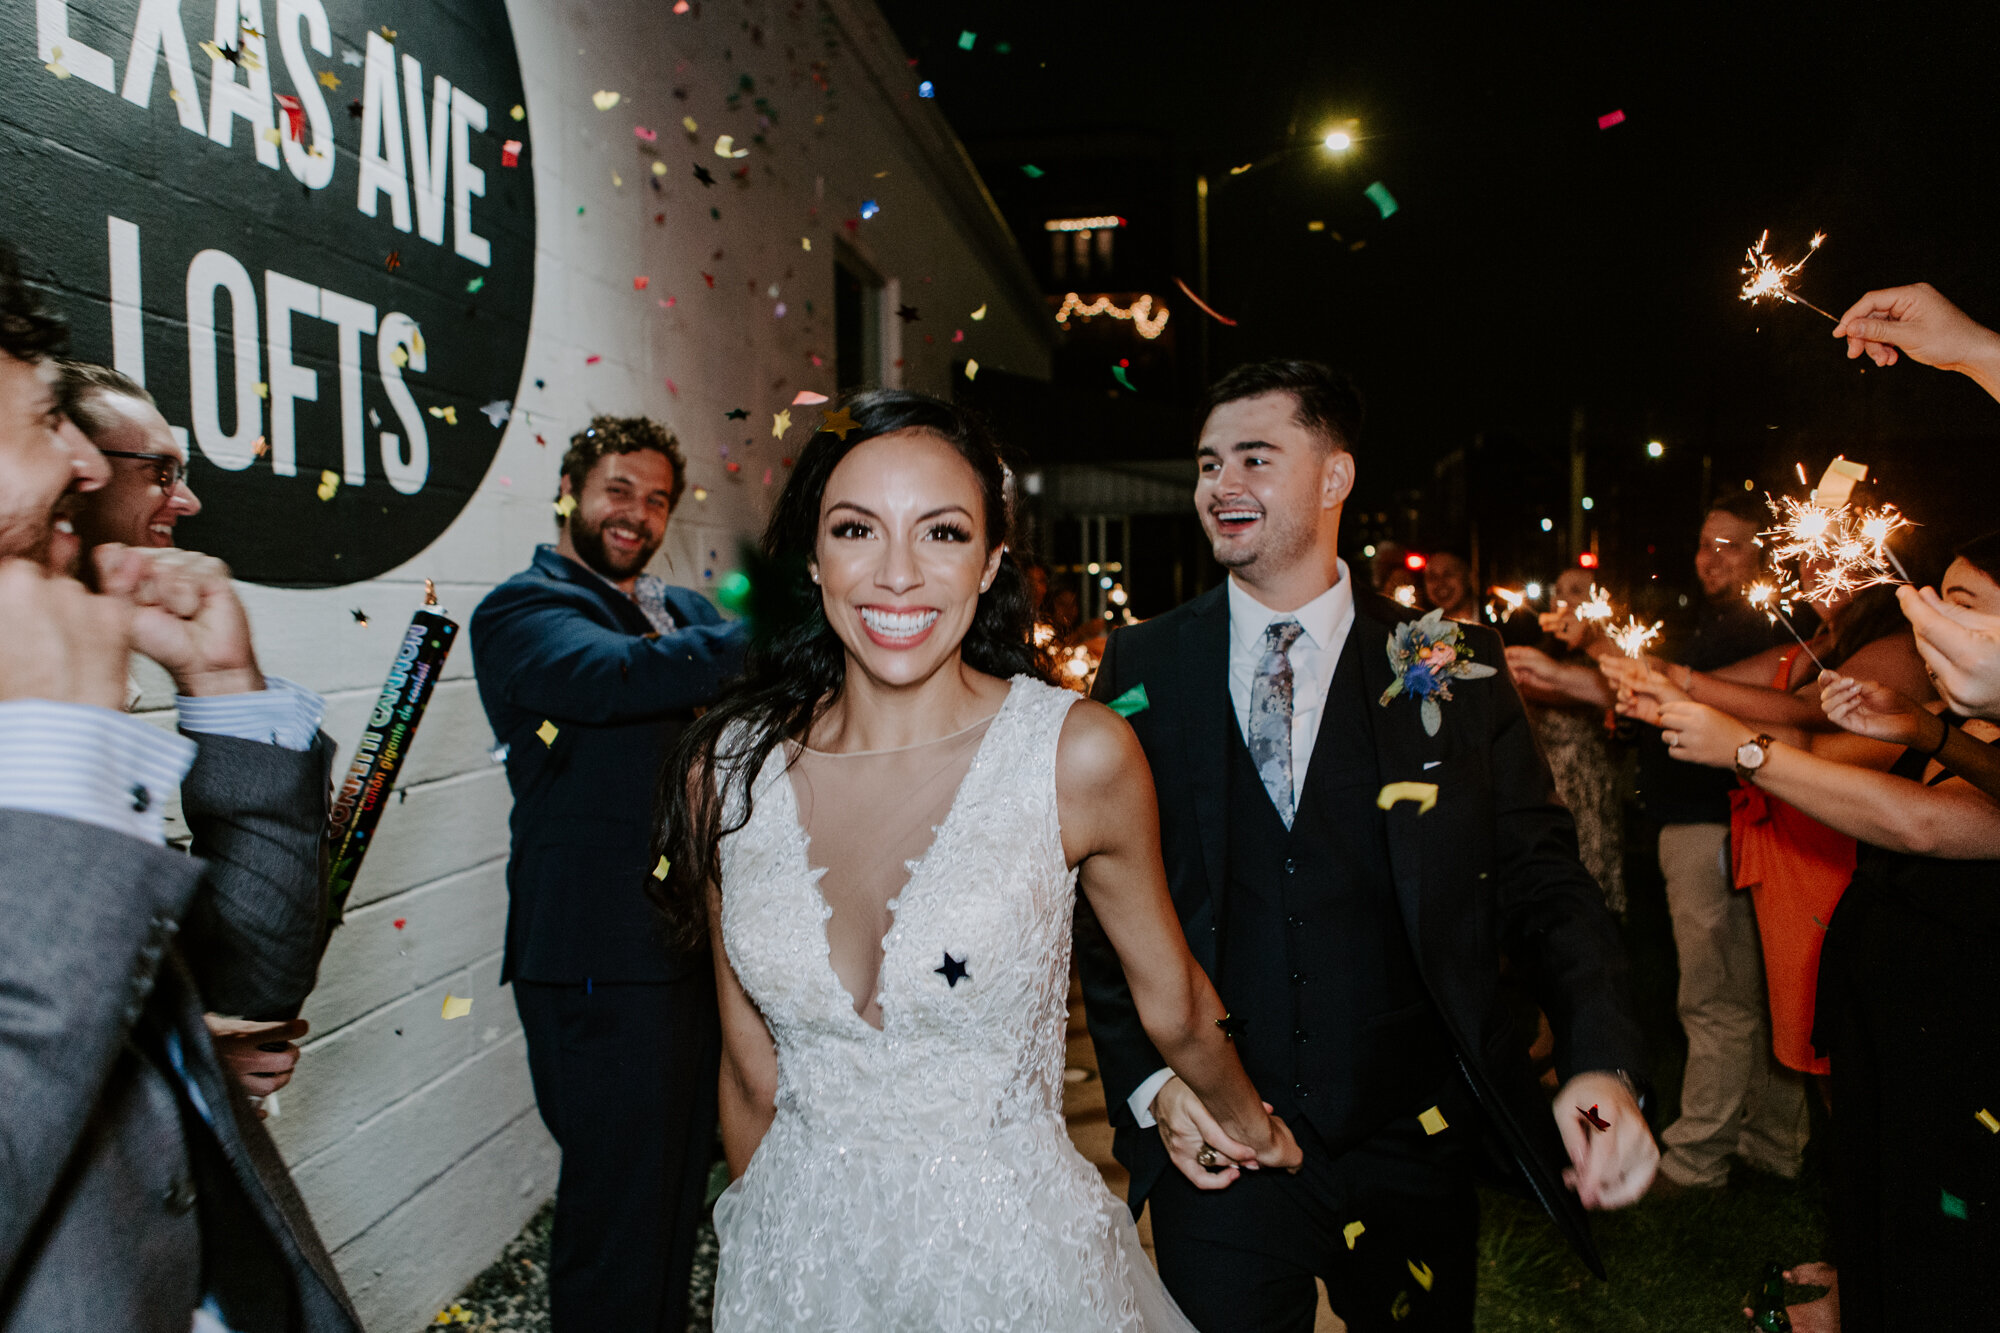 Grand exit, send off with sparklers. Vivacious Wedding Reception at Texas Avenue BNB